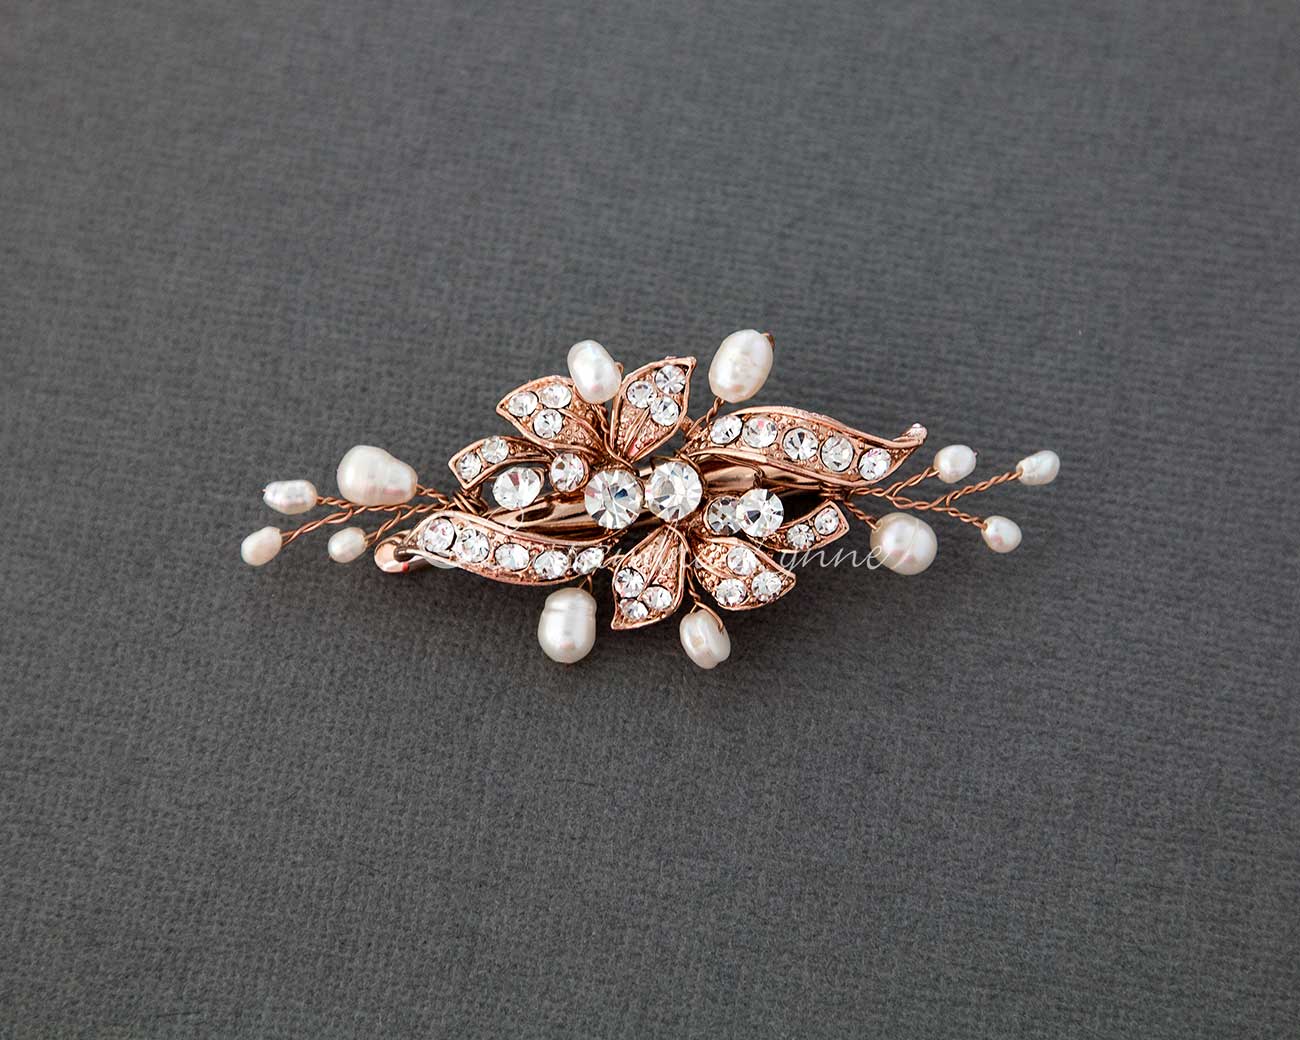 Small Crystal and Pearl Floral Hair Barrette - Cassandra Lynne